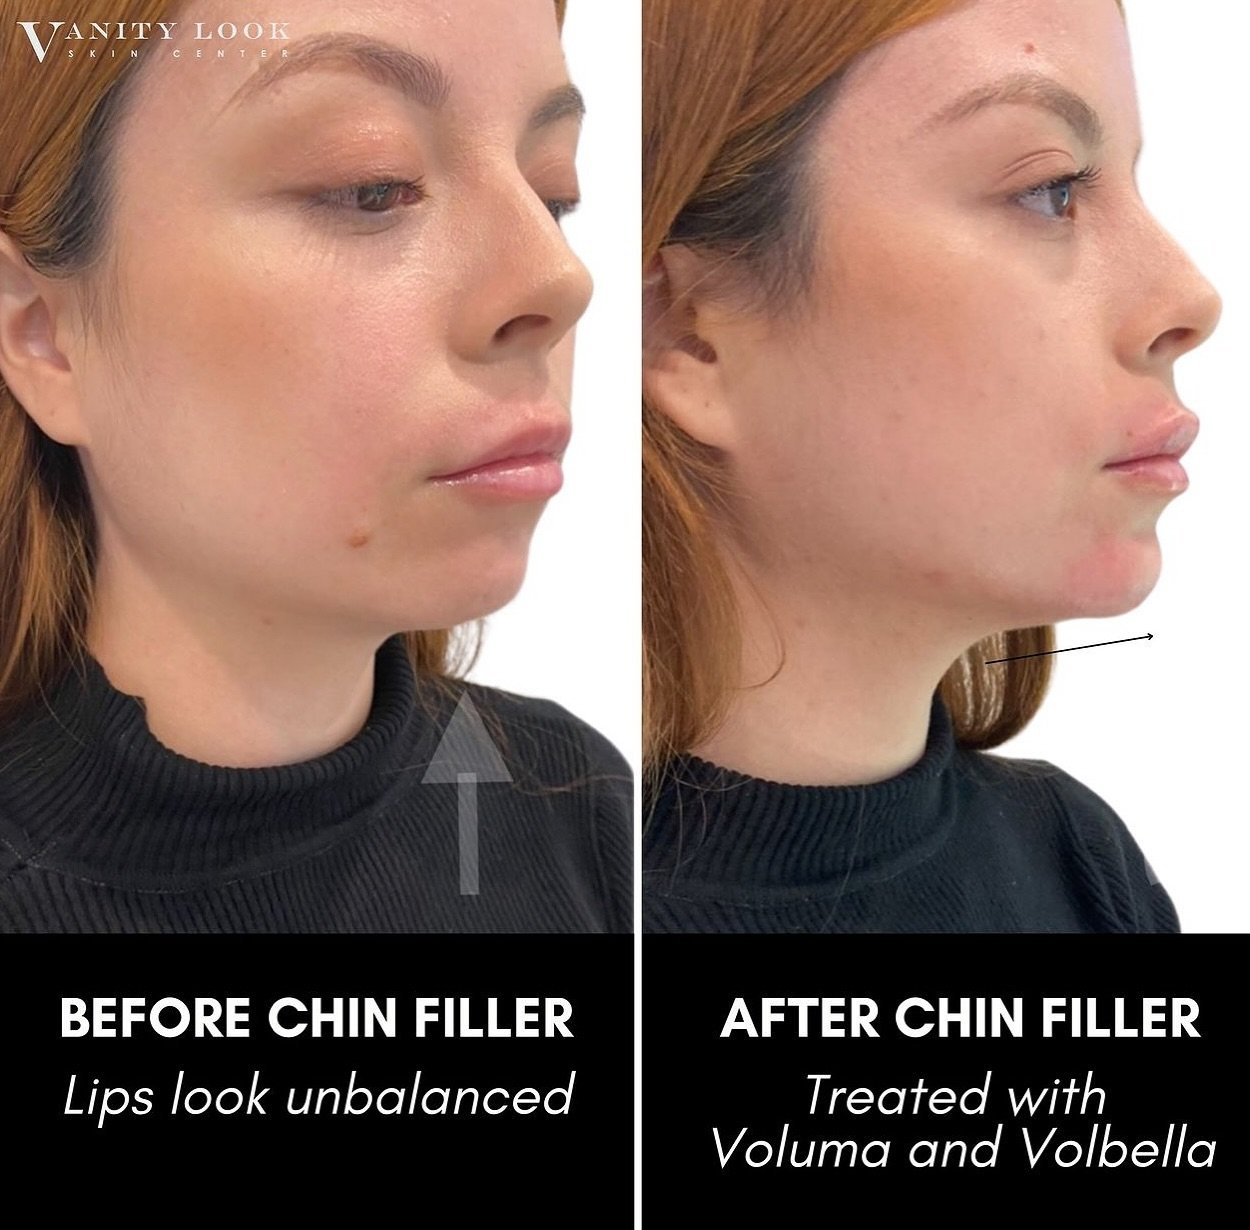 Chin filler can help create a more balanced and proportional appearance for the lips by enhancing the overall harmony of the facial features. By adding volume to the chin area, the lower portion of the face becomes more defined and structured, which 